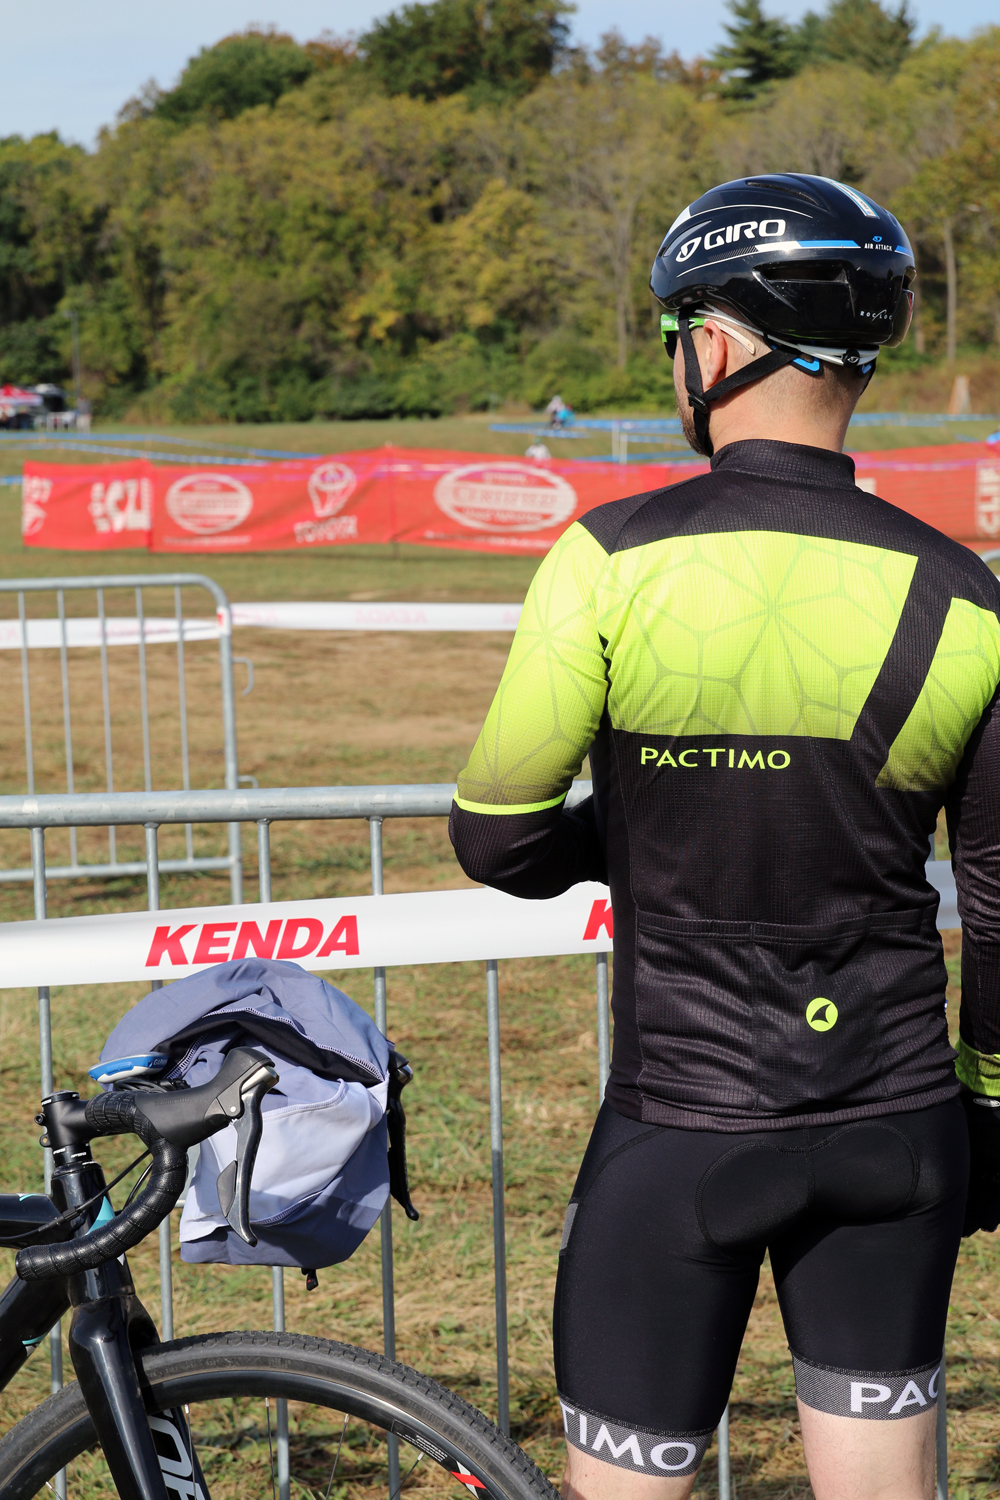 Warm, Bright, Reflective, the Pactimo Fall Collection Has it All - Bikerumor